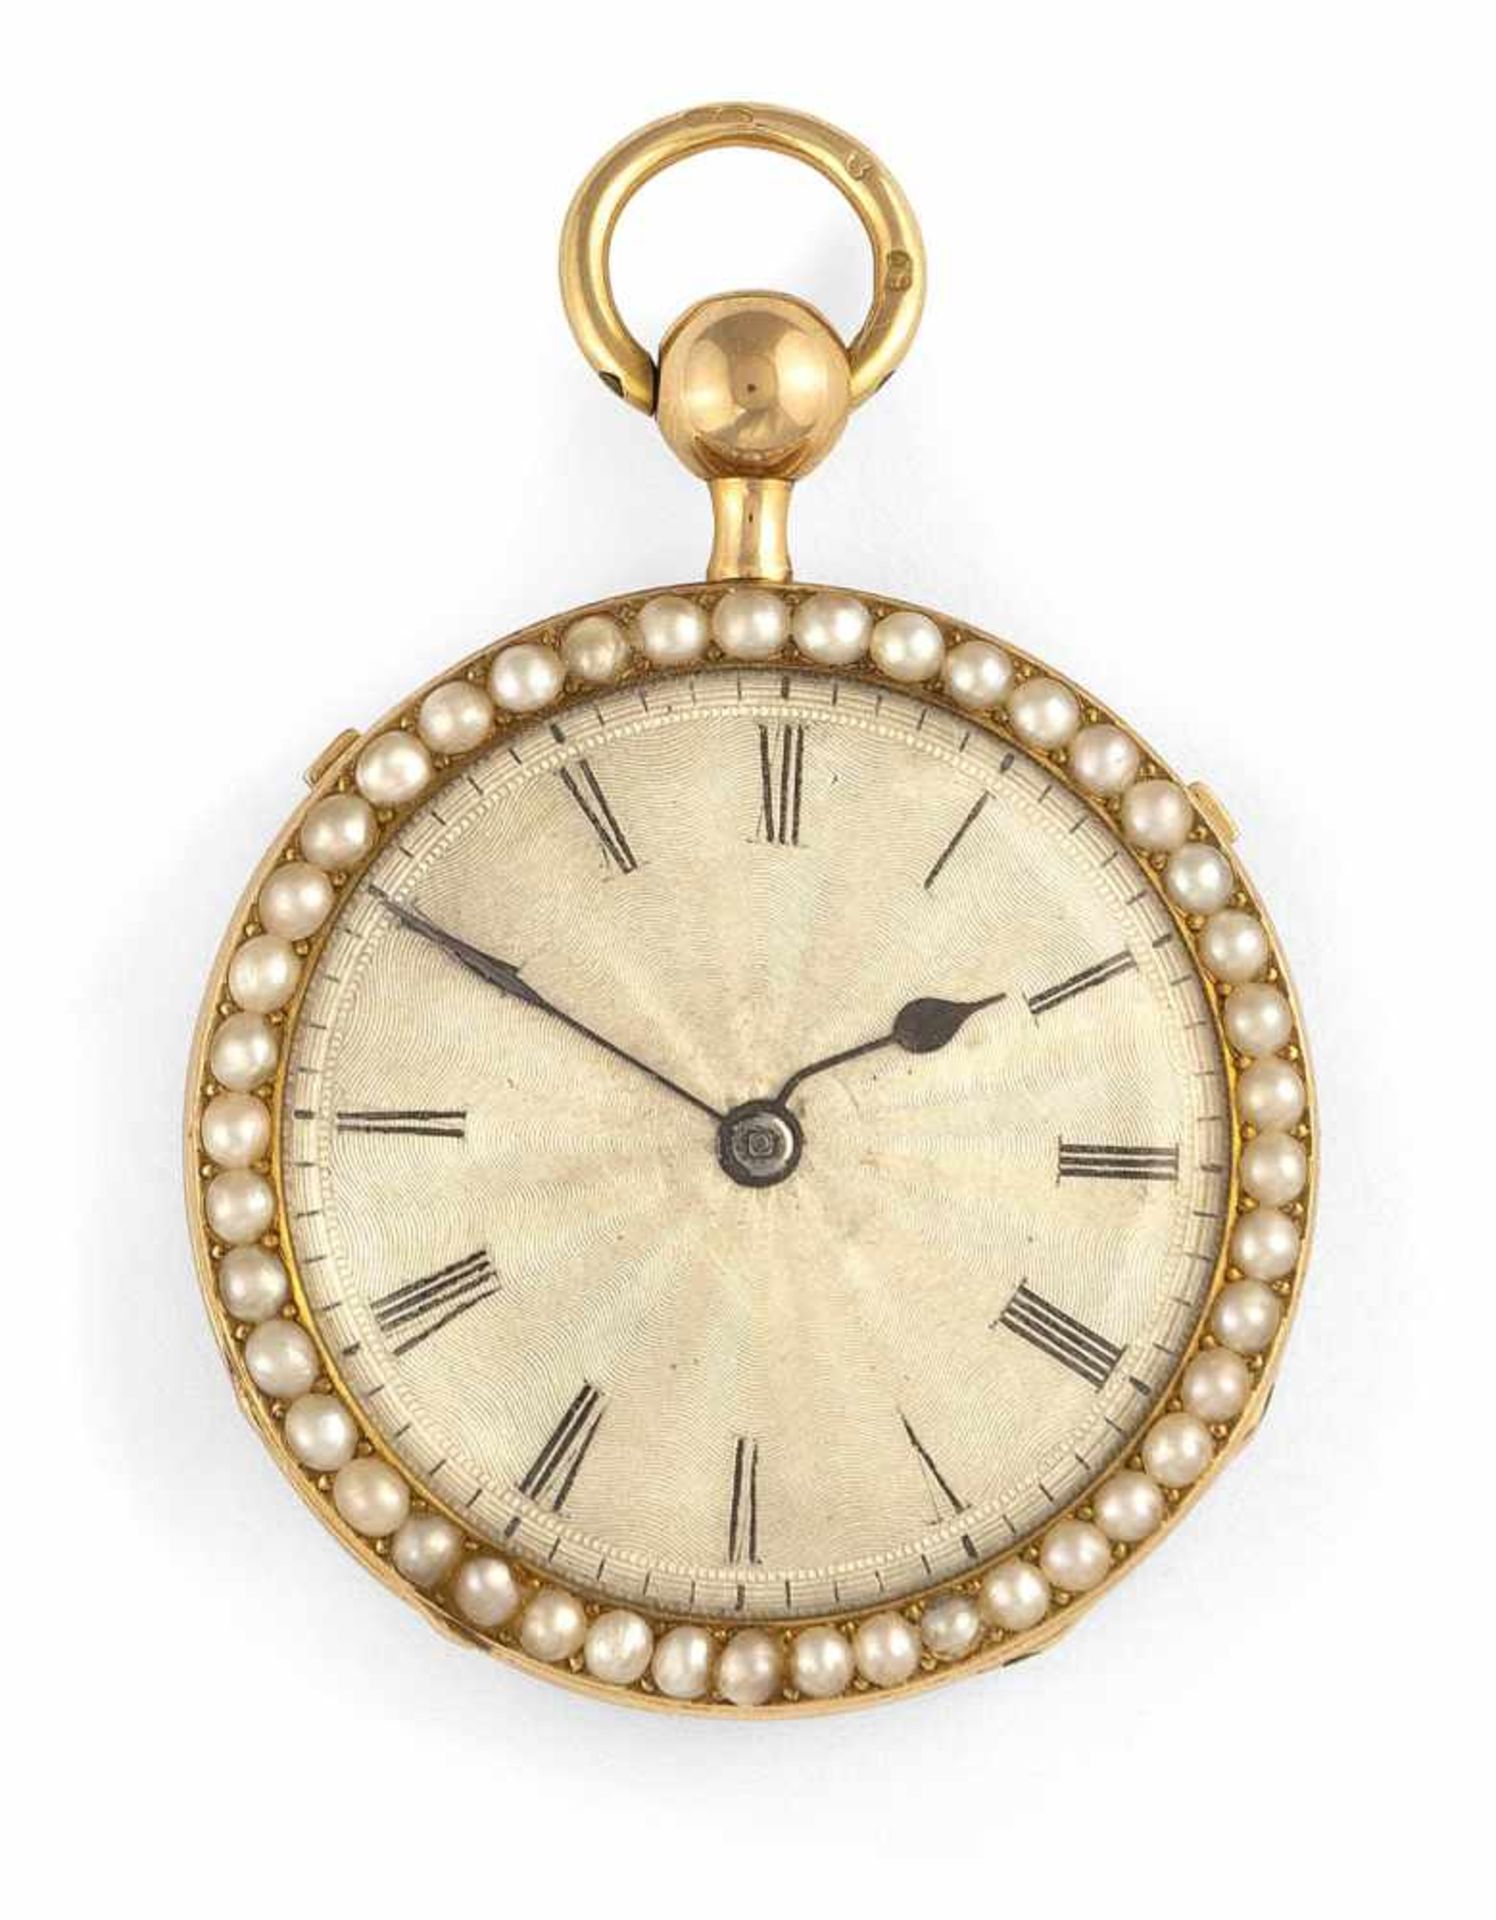 A fine 18ct gold ladies pocket watch, France, c. 1820. Enamel and pearl decorated case. - Image 2 of 4